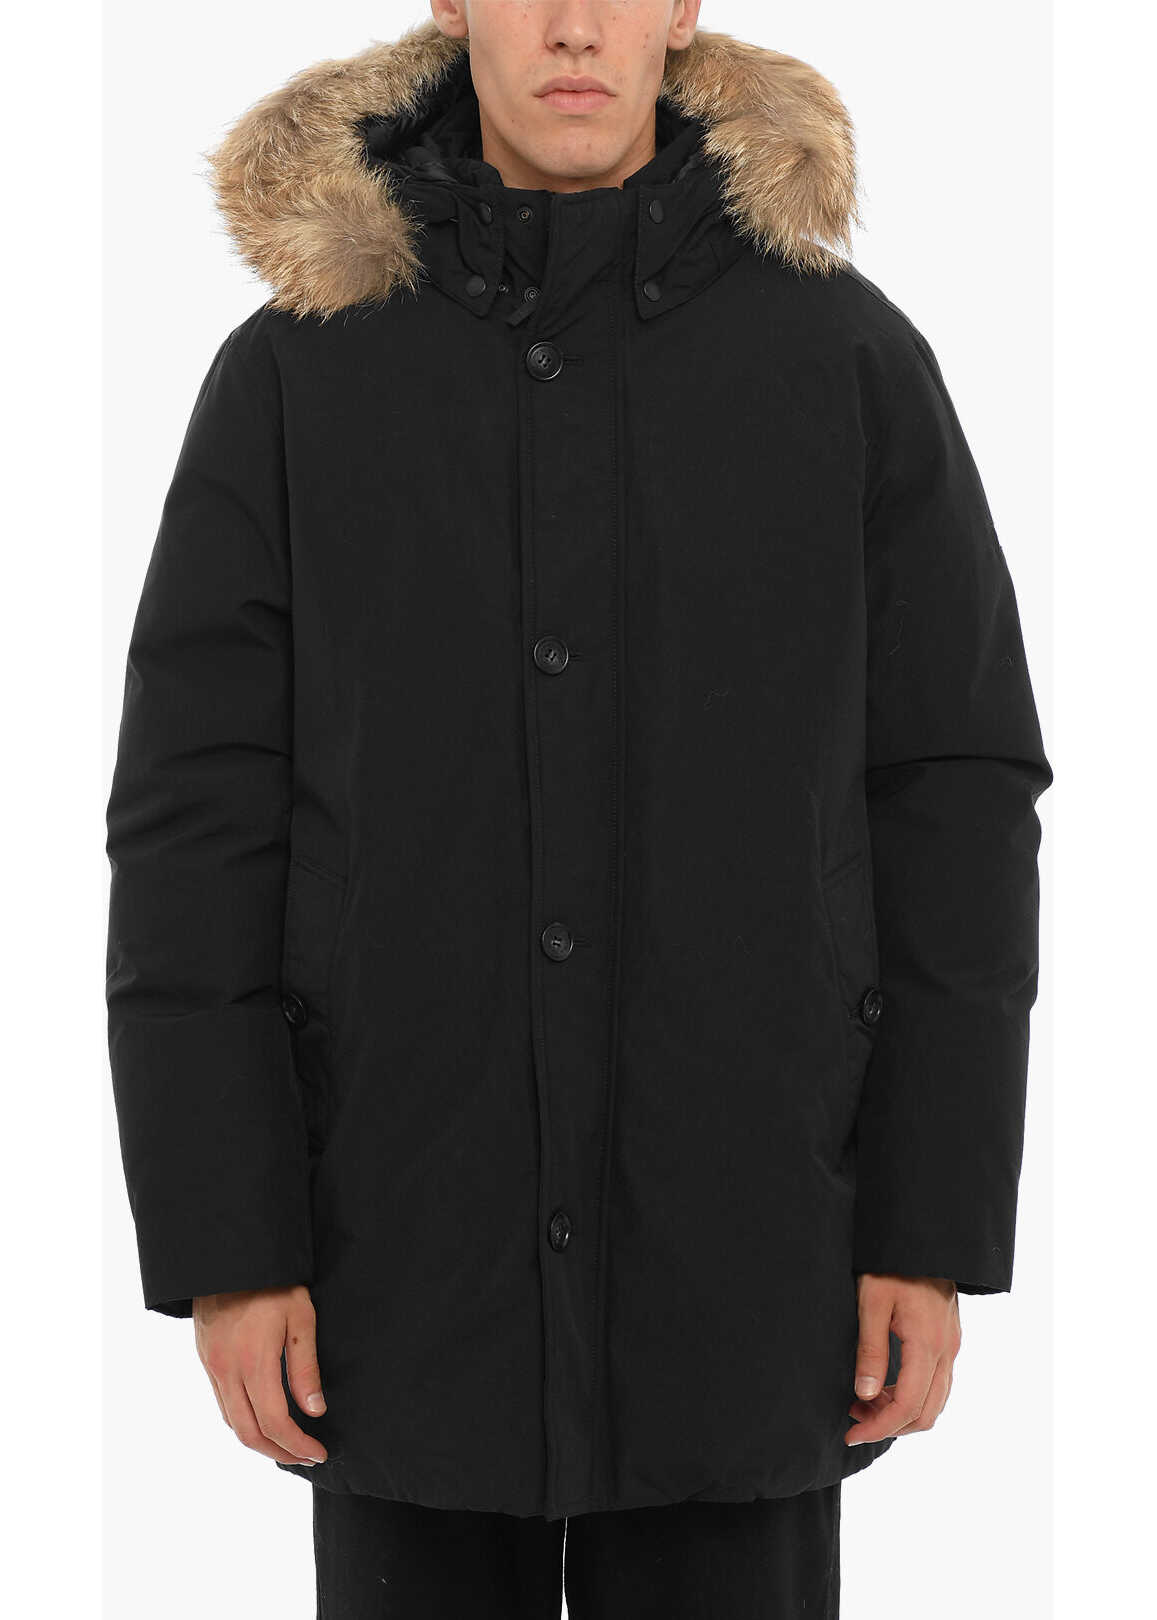 Woolrich Cotton And Nylon South Bay Down Jacket With Real Fur Finishe Black